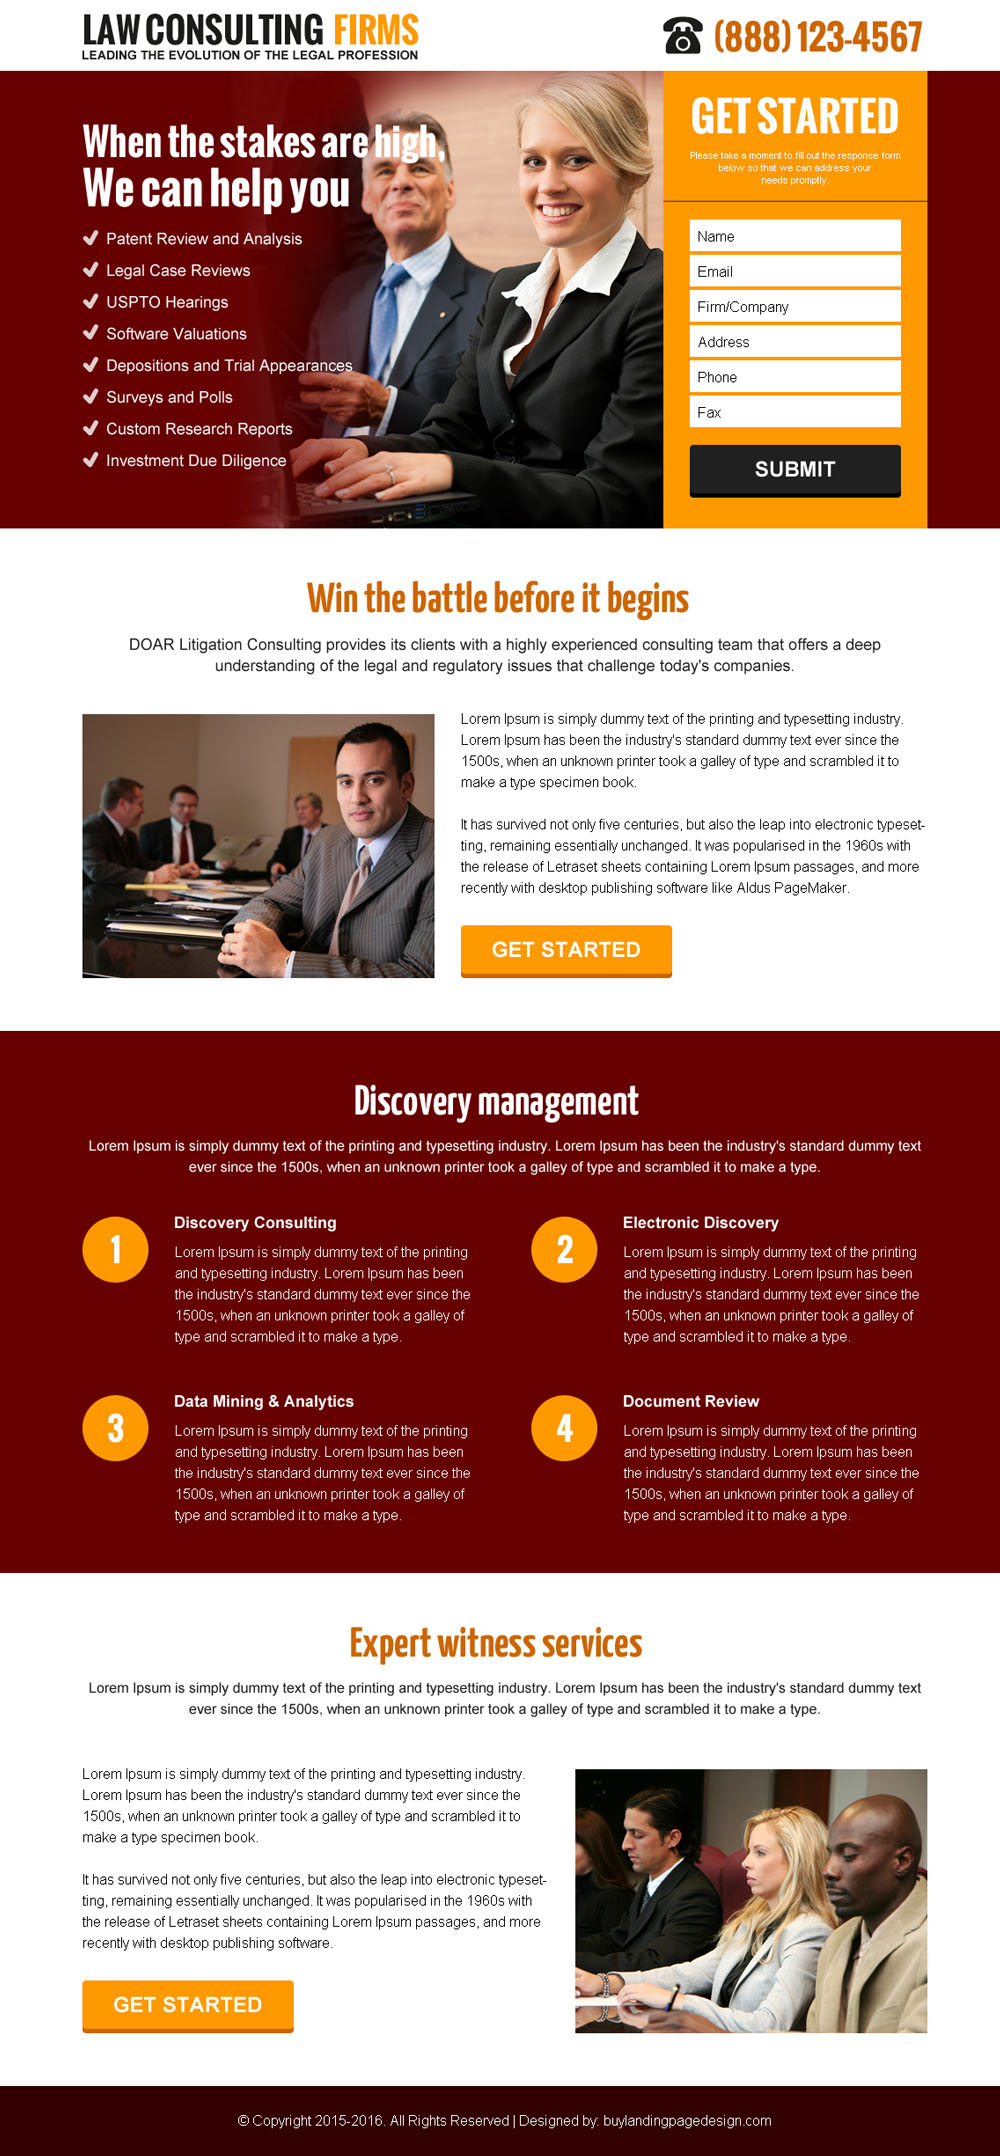 law-consulting-firms-legal-profession-lead-gen-converting-landing-page-design-007